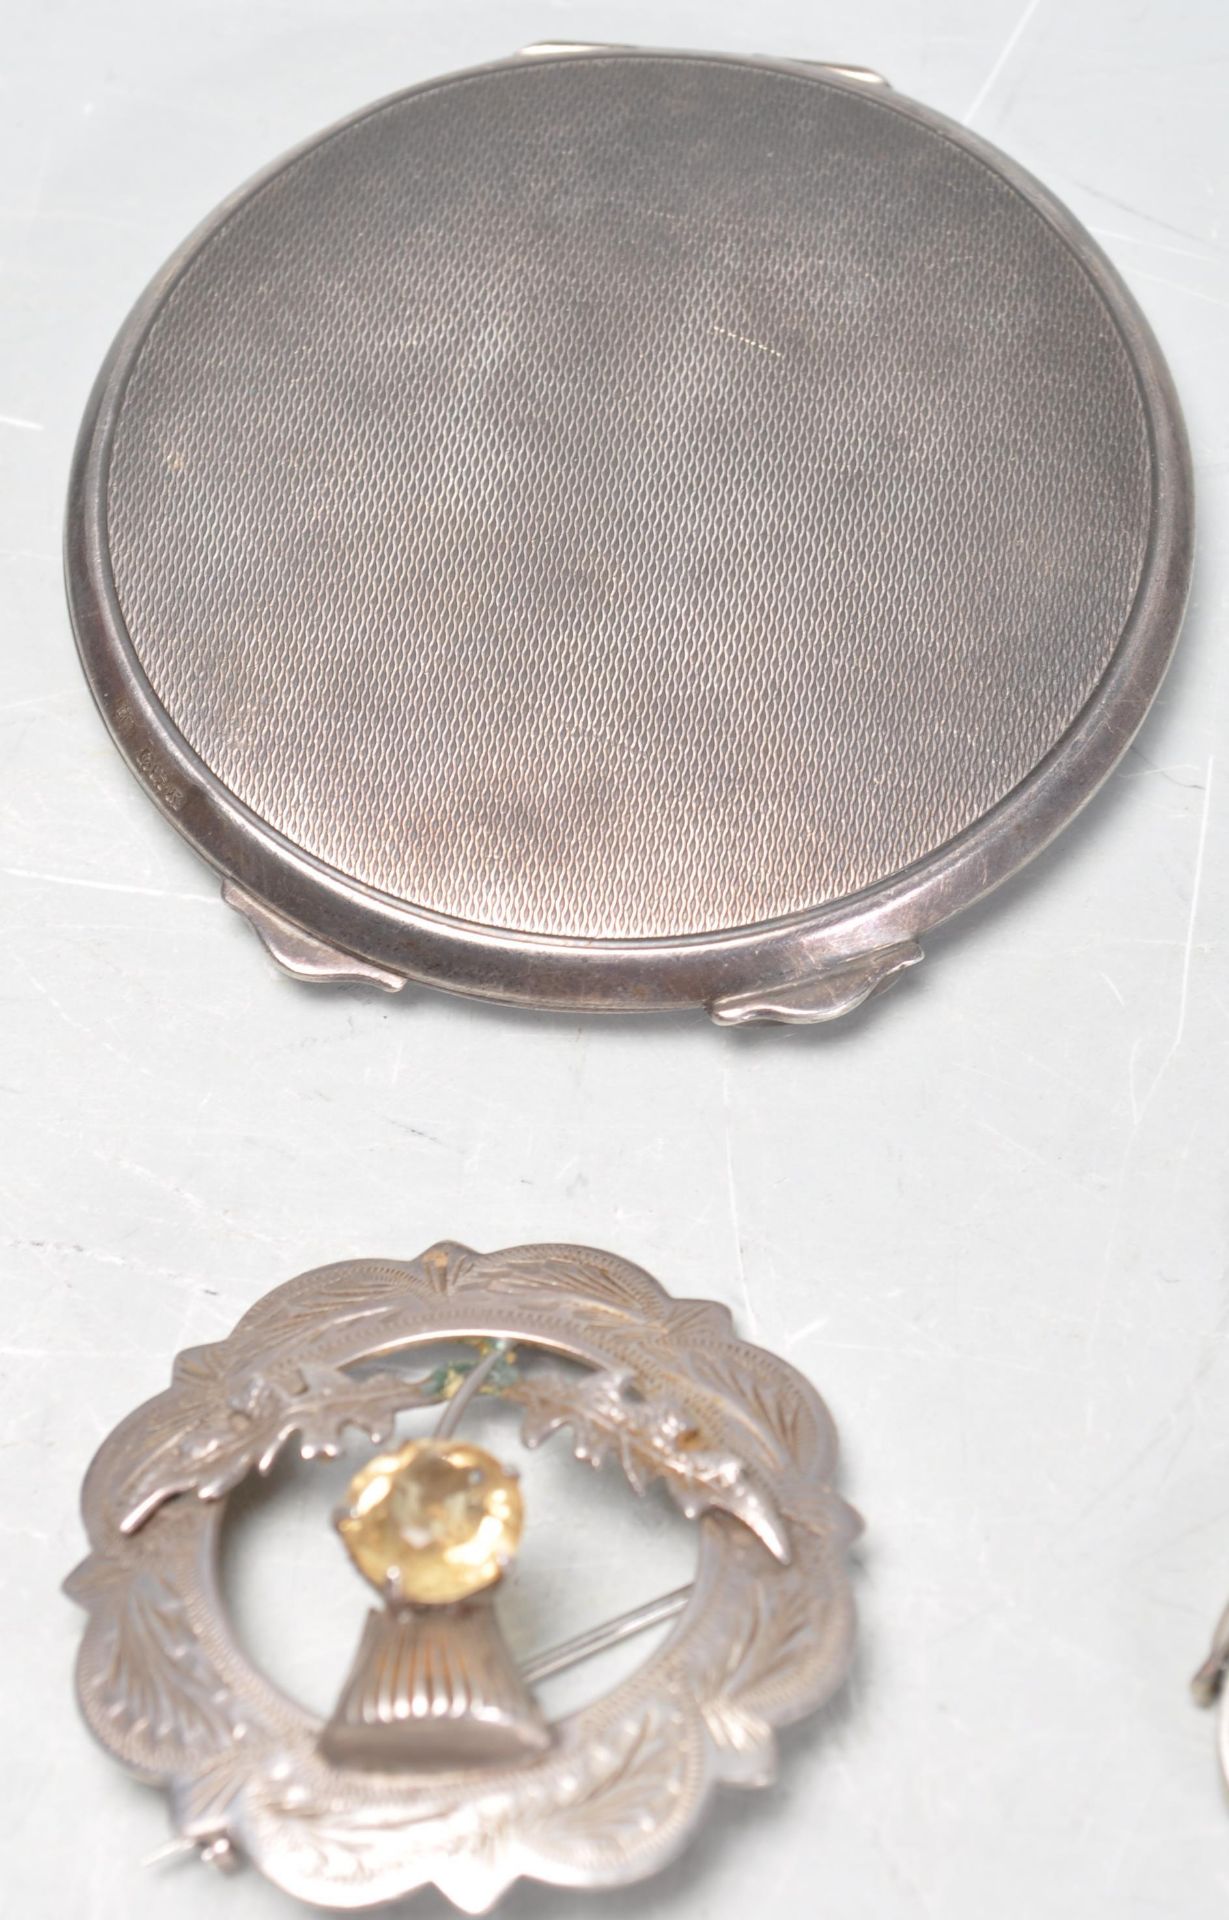 GROUP OF VINTAGE SILVER JEWELLERY AND ACCESSORIES - Image 4 of 7